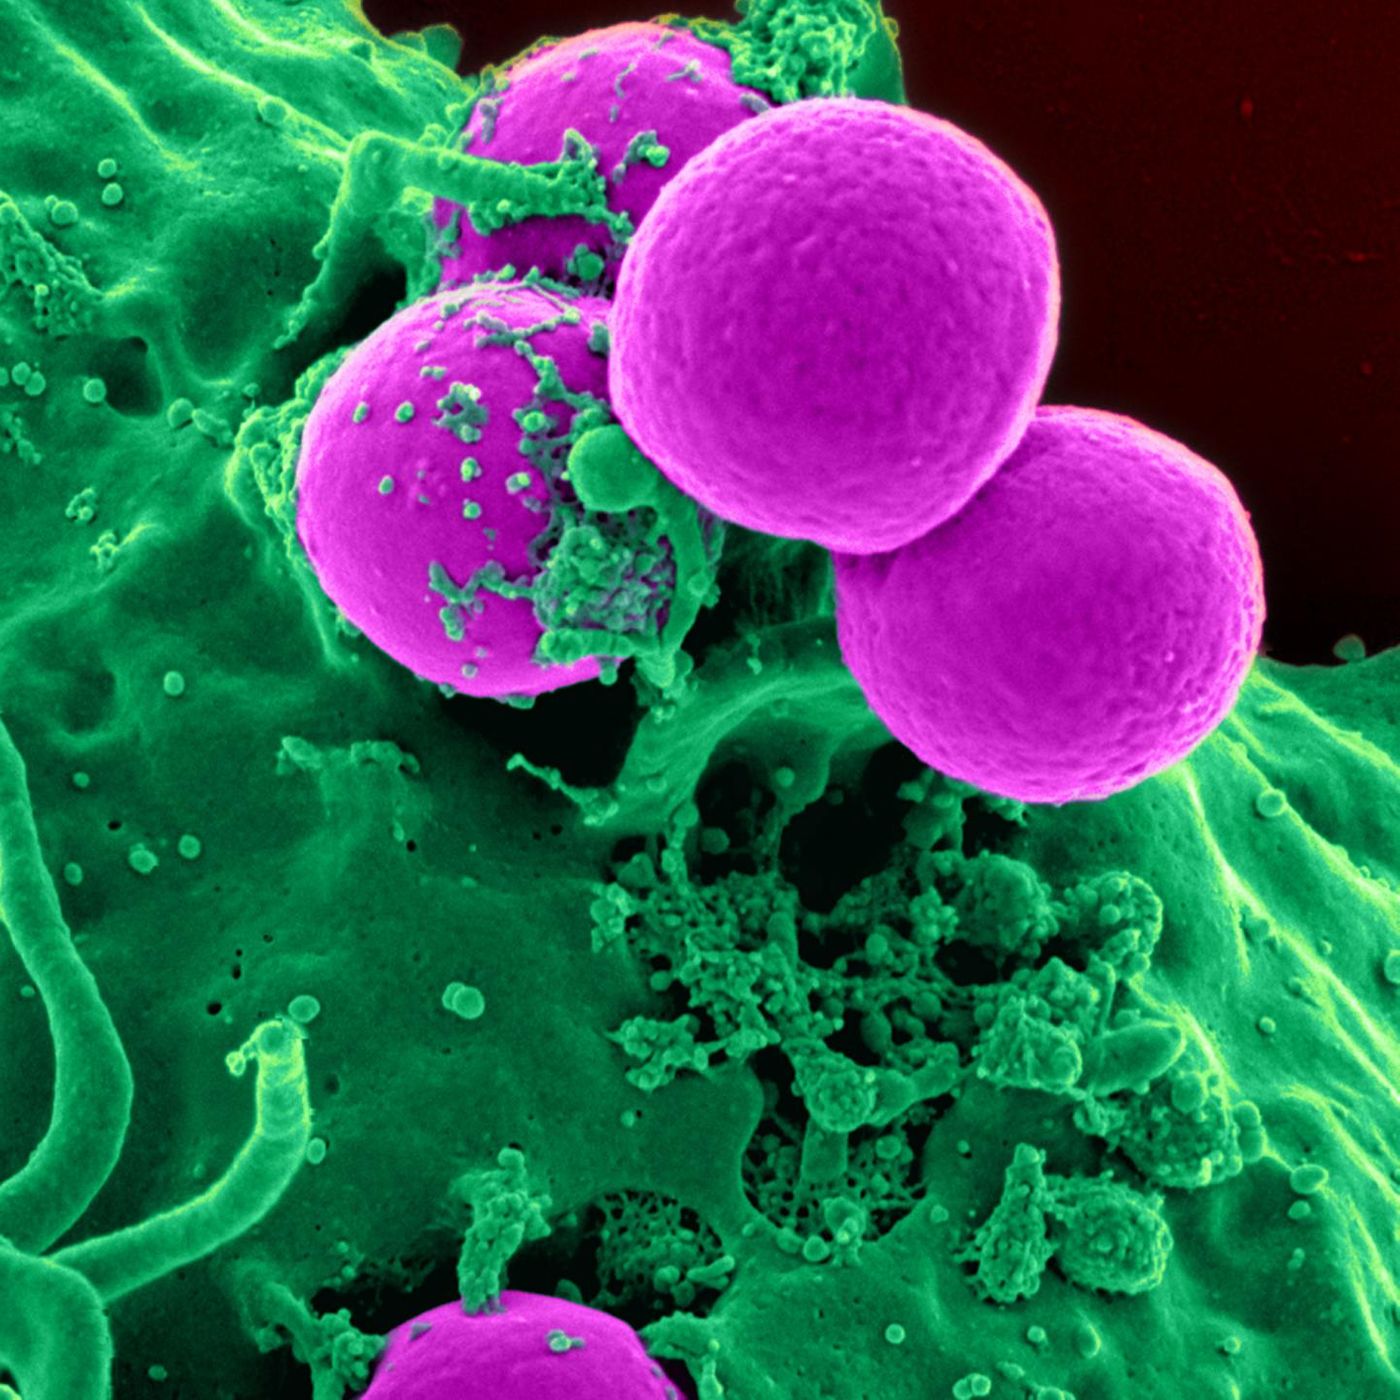 MRSA, pictured here, has developed resistance to certain antibiotic treatments. / Credit: National Institutes of Health (NIH)